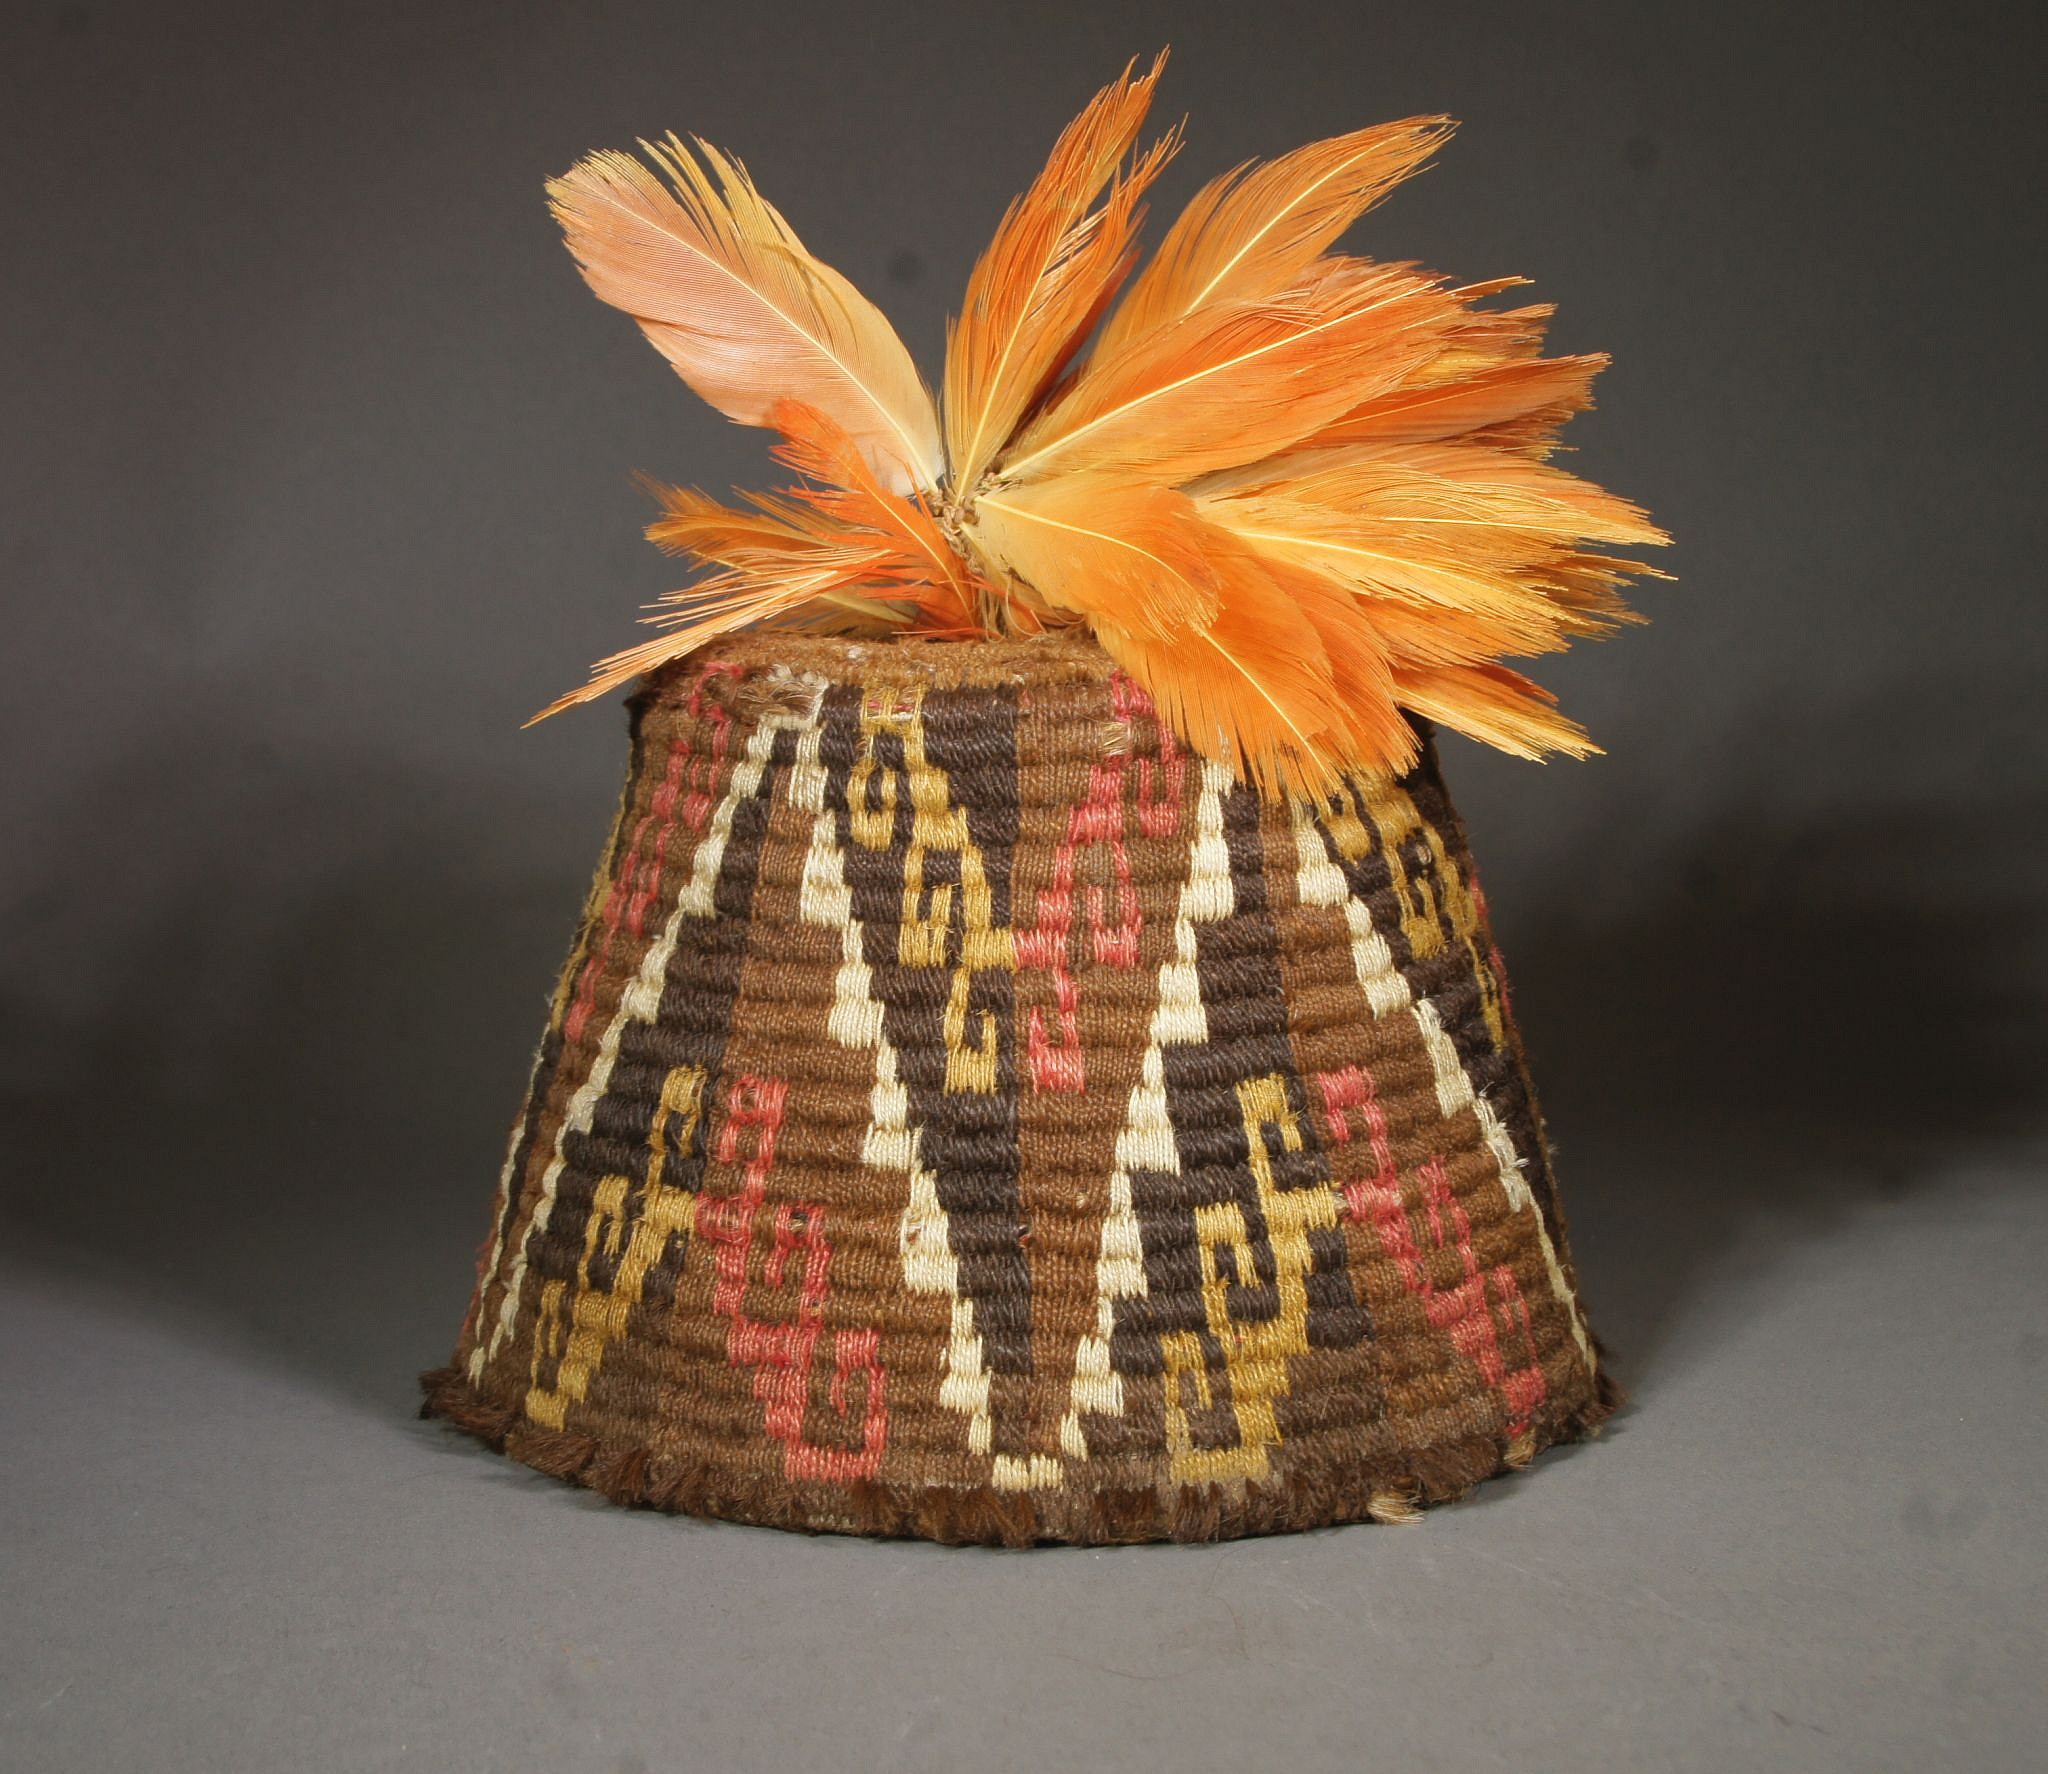 Chile, Inca fez style hat with step design in brown, gold, white and pink and feather plume
A fez style hat was placed as the final adornament on the Inca mummy bundles of Pica, Chile. They were not made anywhere else in all of the Inca Empire.  They were made by a coil method wrapping different colored wool yarns around the coils to acheive the quartered step pattern.  A similar example is illustrated in Arica Diez Mil Anos
Media: Textile
Dimensions: H. 4 1/4 in.hat only  H. with feathers 9"
$5,500
91362